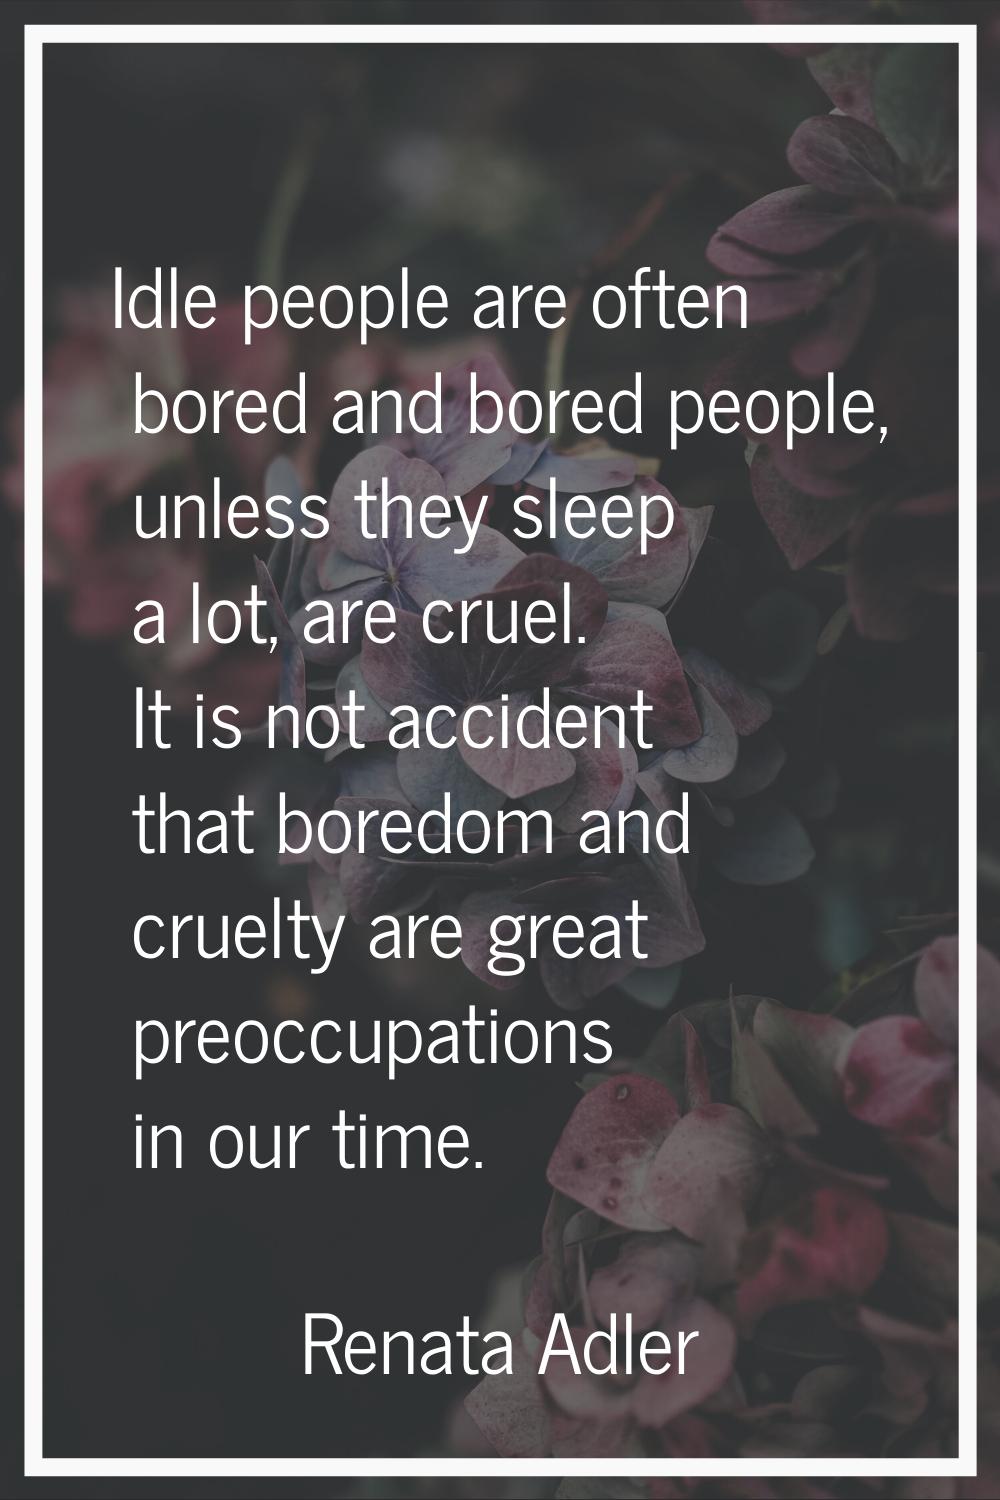 Idle people are often bored and bored people, unless they sleep a lot, are cruel. It is not acciden